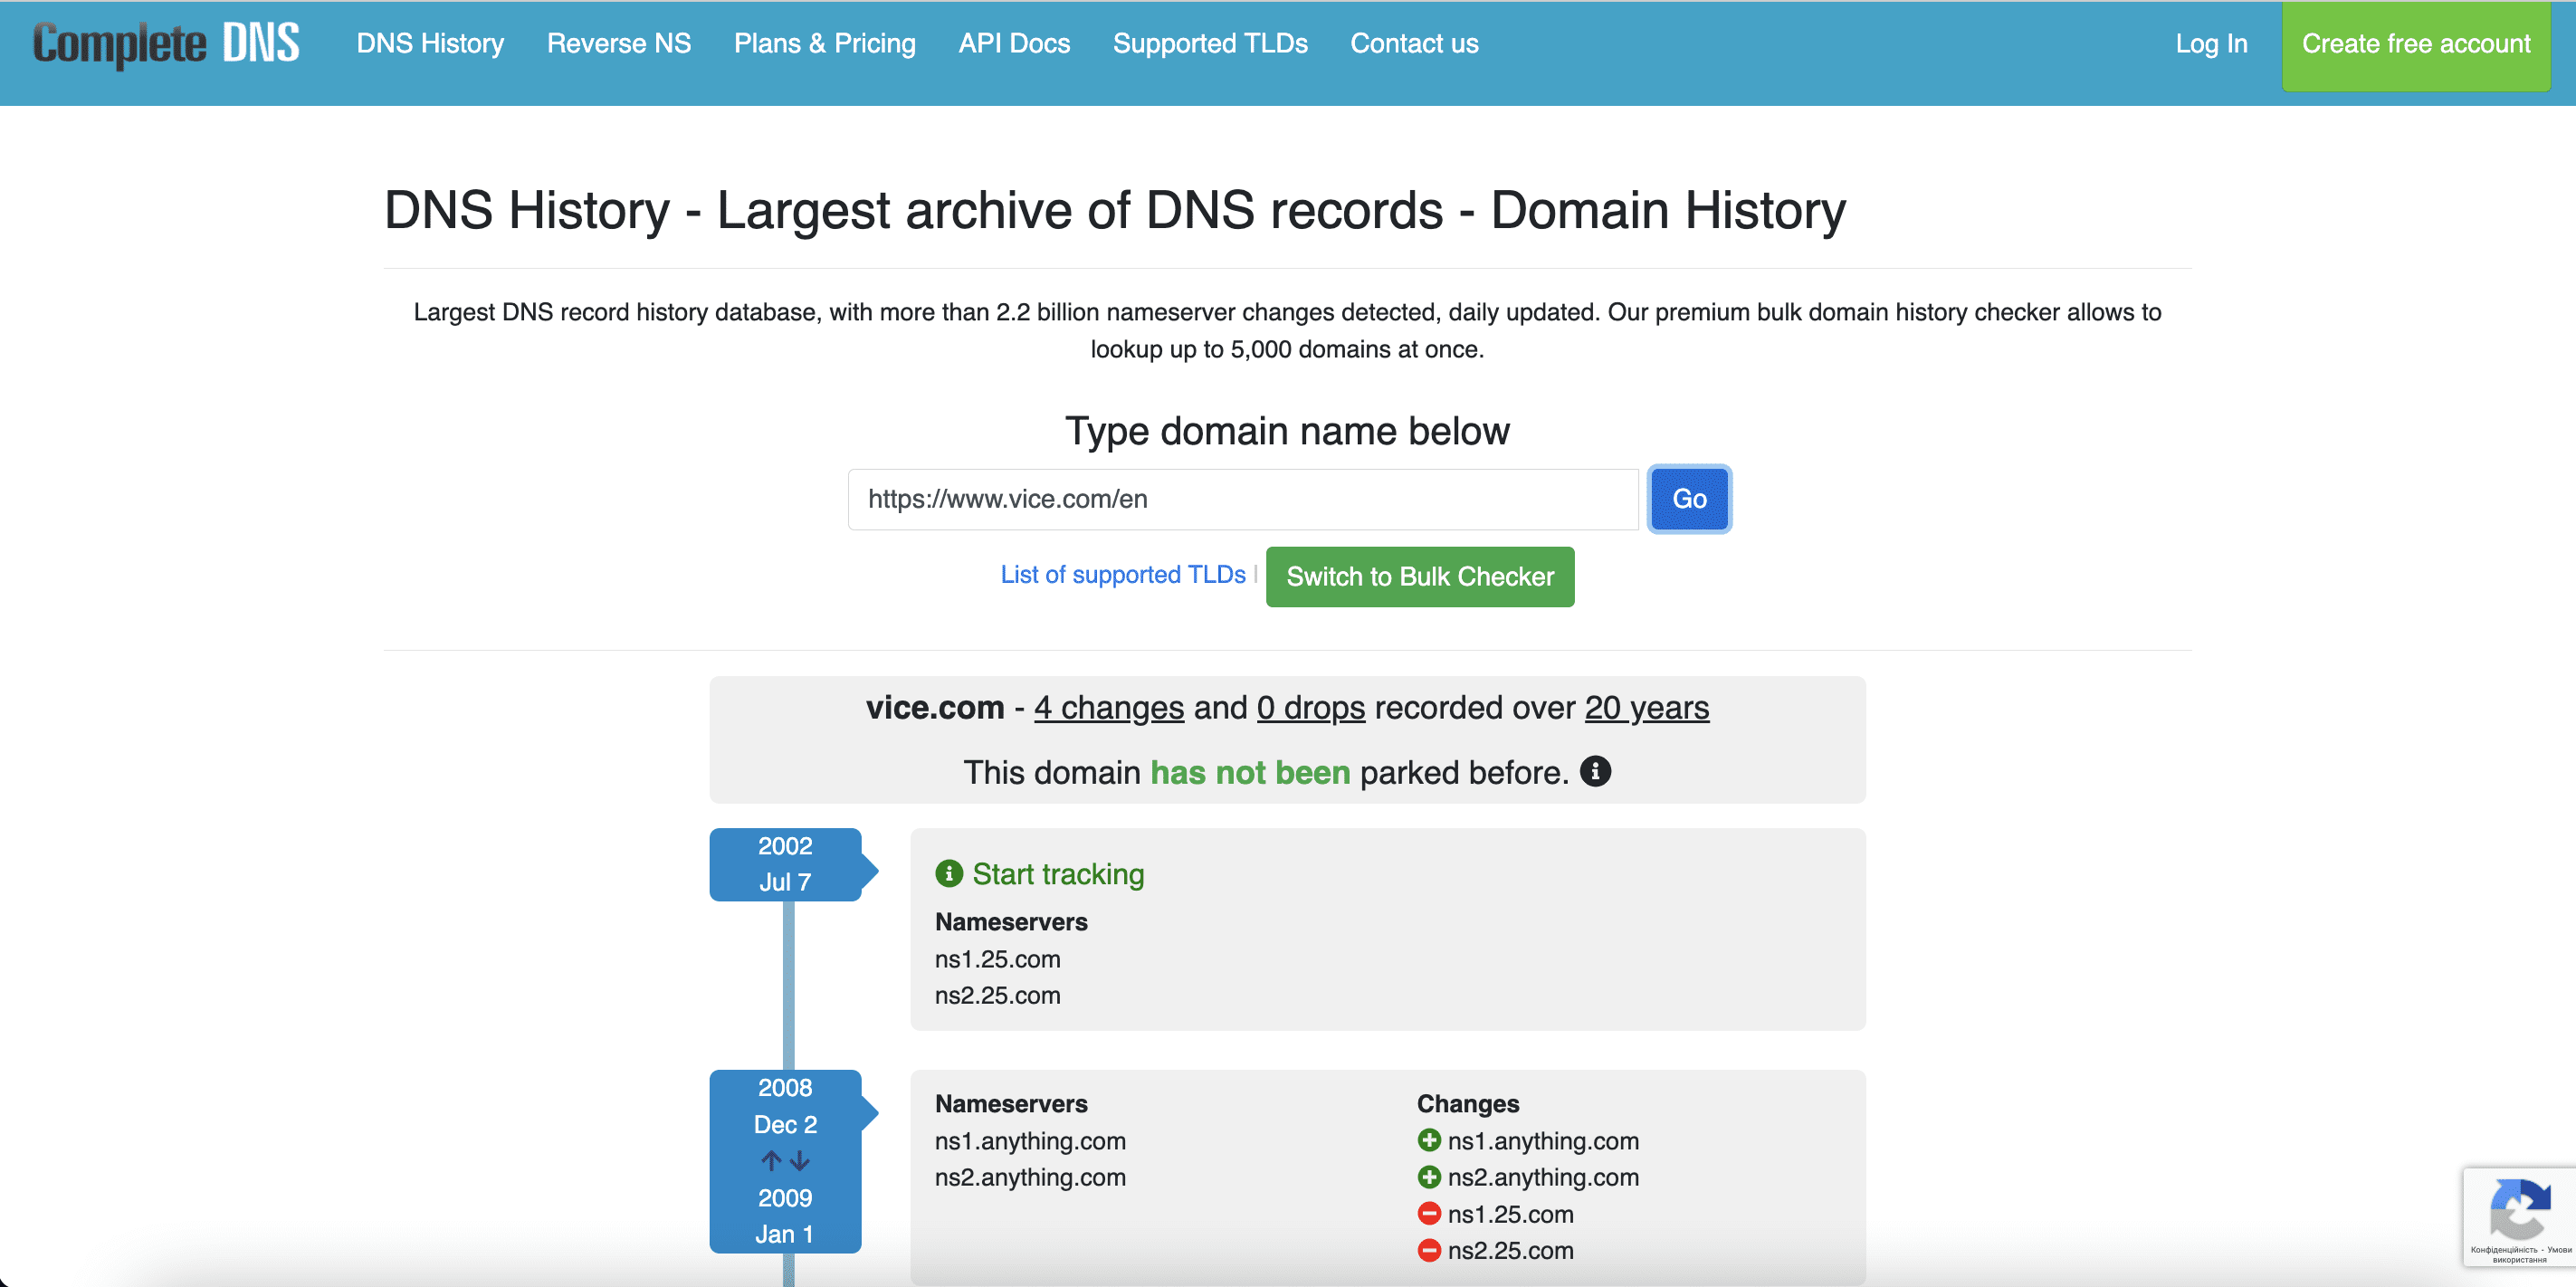 Check domain history with Complete DNS